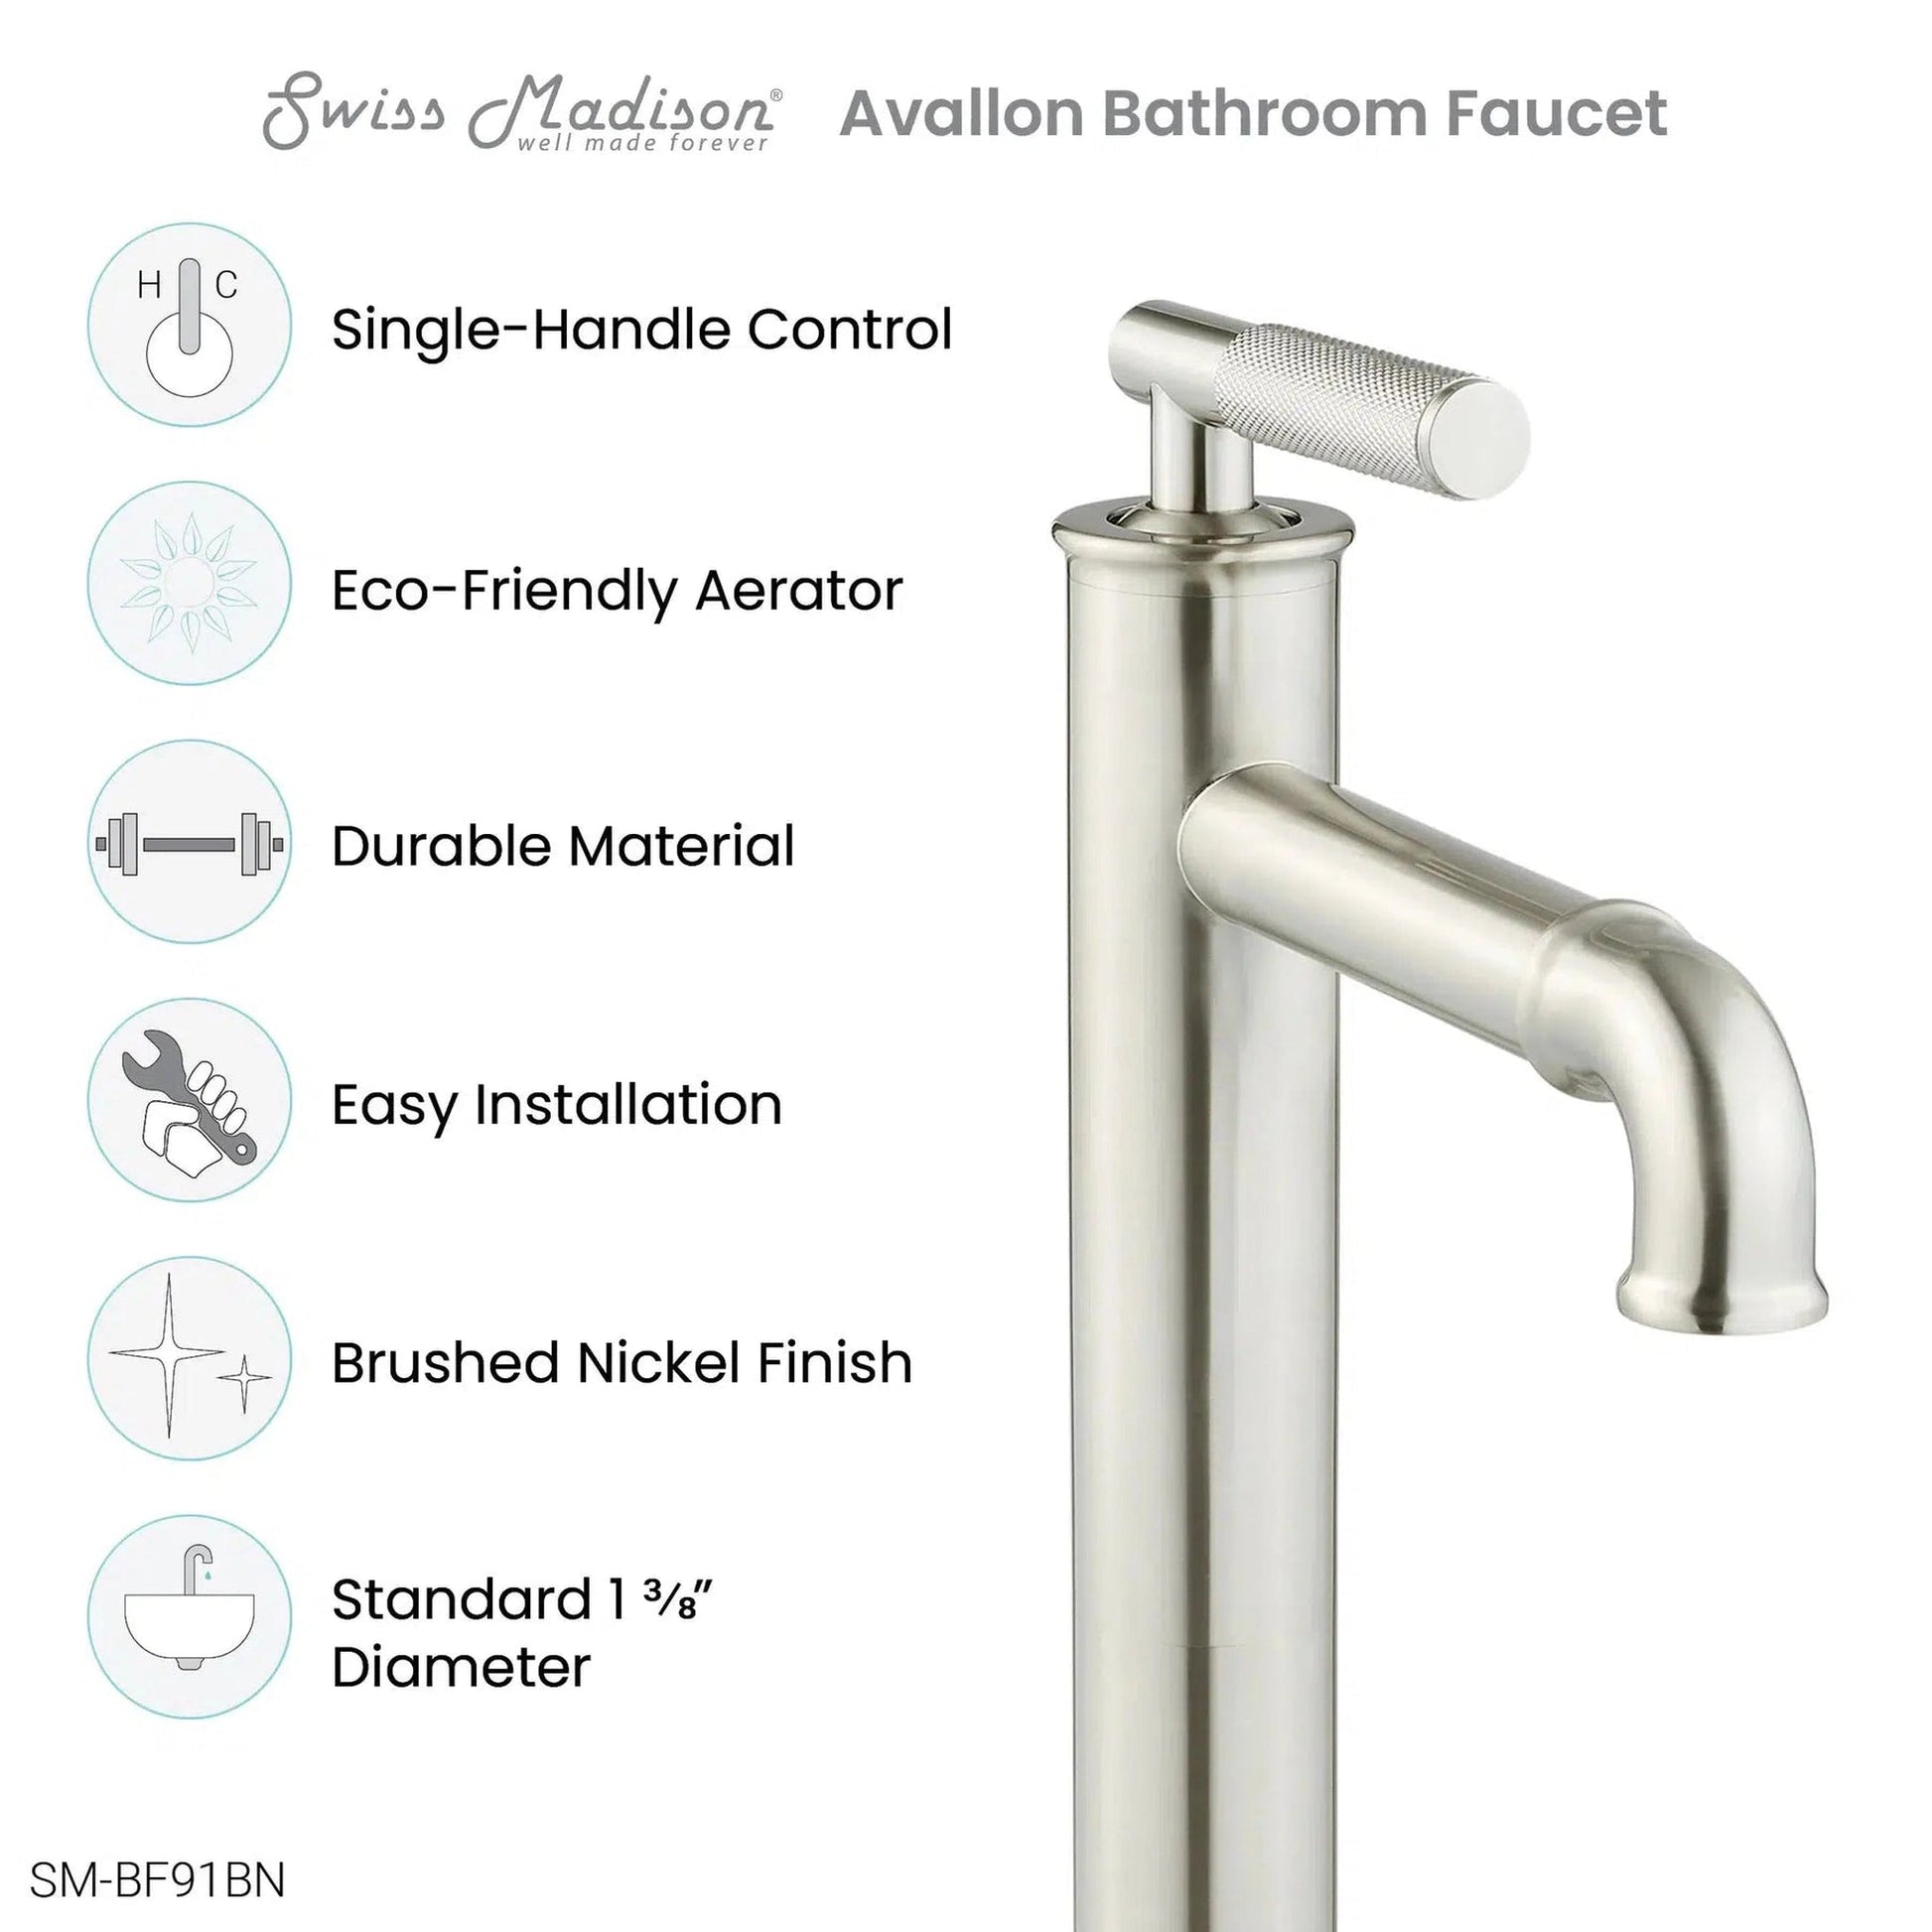 Swiss Madison Avallon 11" Single-Handle Brushed Nickel Bathroom Faucet With 1.2 GPM Flow Rate